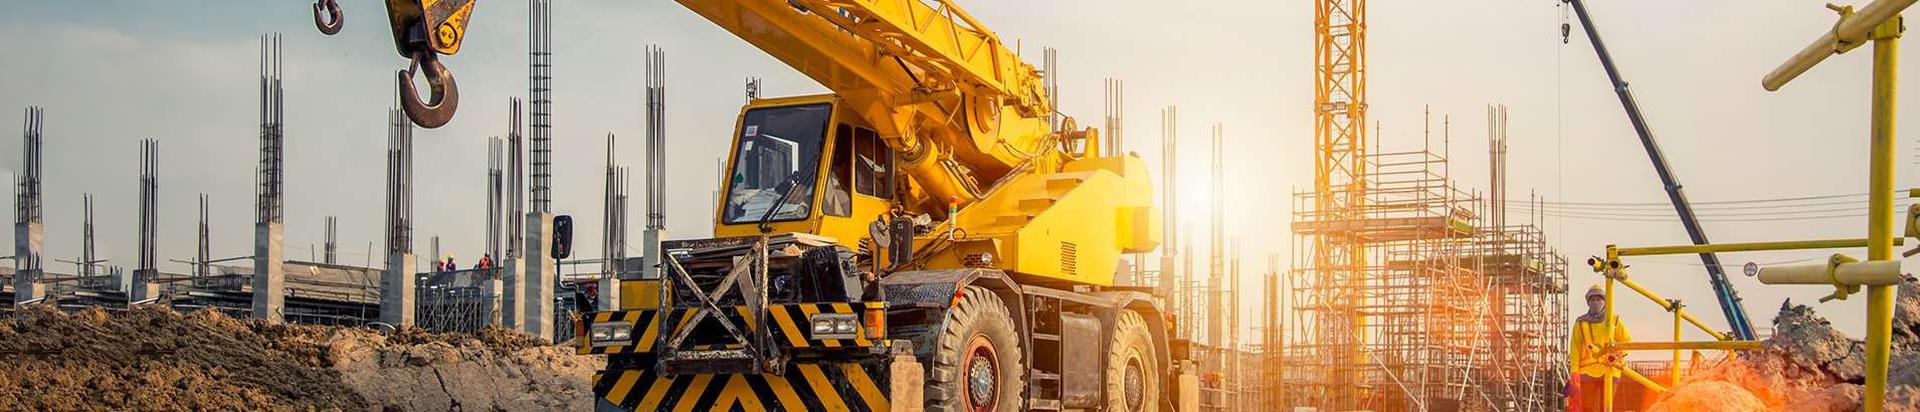 construction machinery and tools, lifting and handling machines, lifting services, Lifting and lifting mechanisms and parts, Device work, Machinework, Lifting aids, construction and real estate